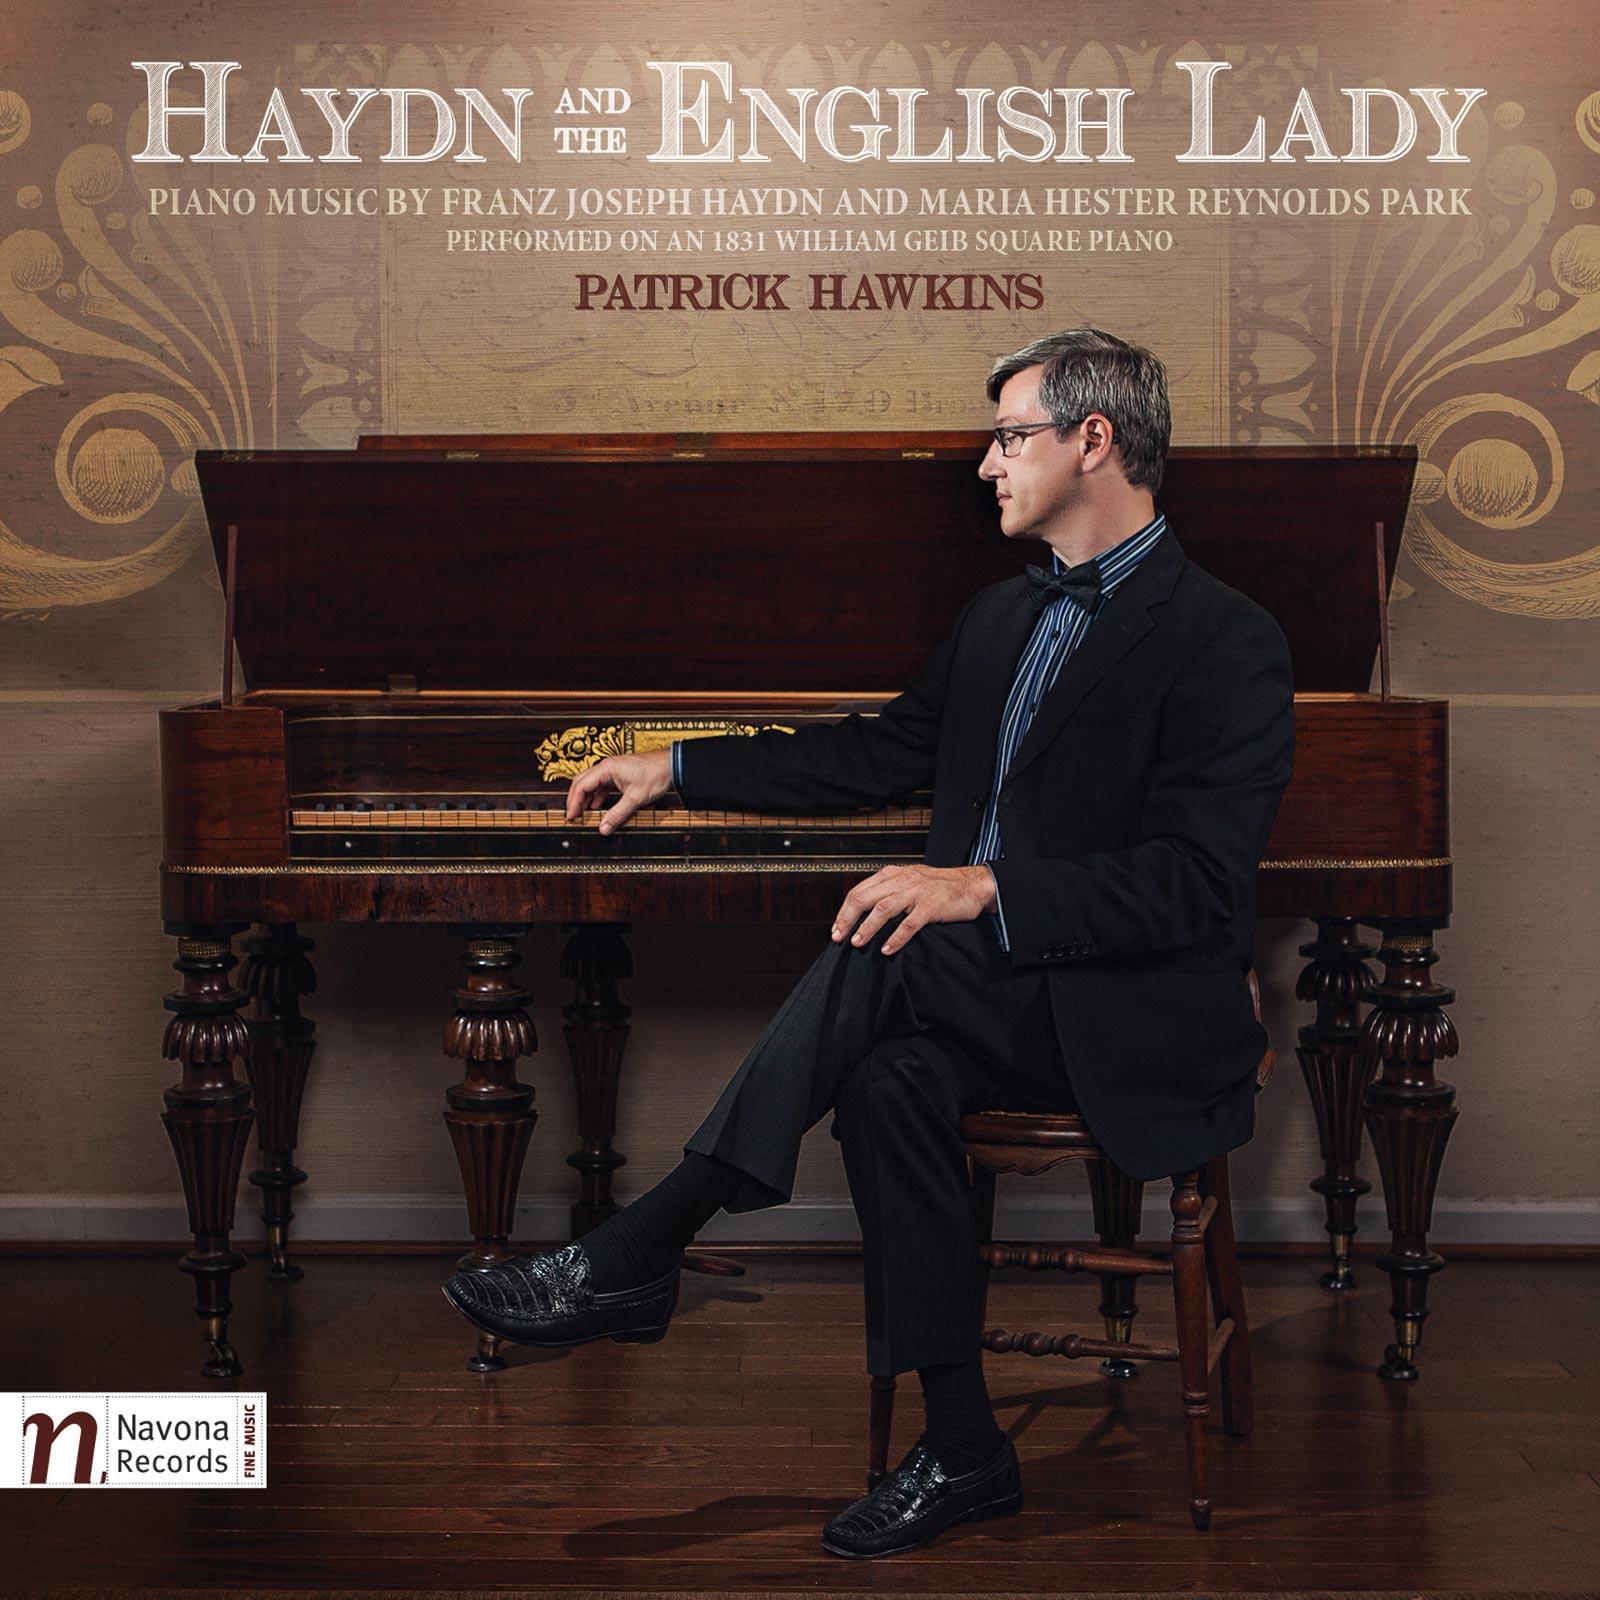 Haydn and the English Lady